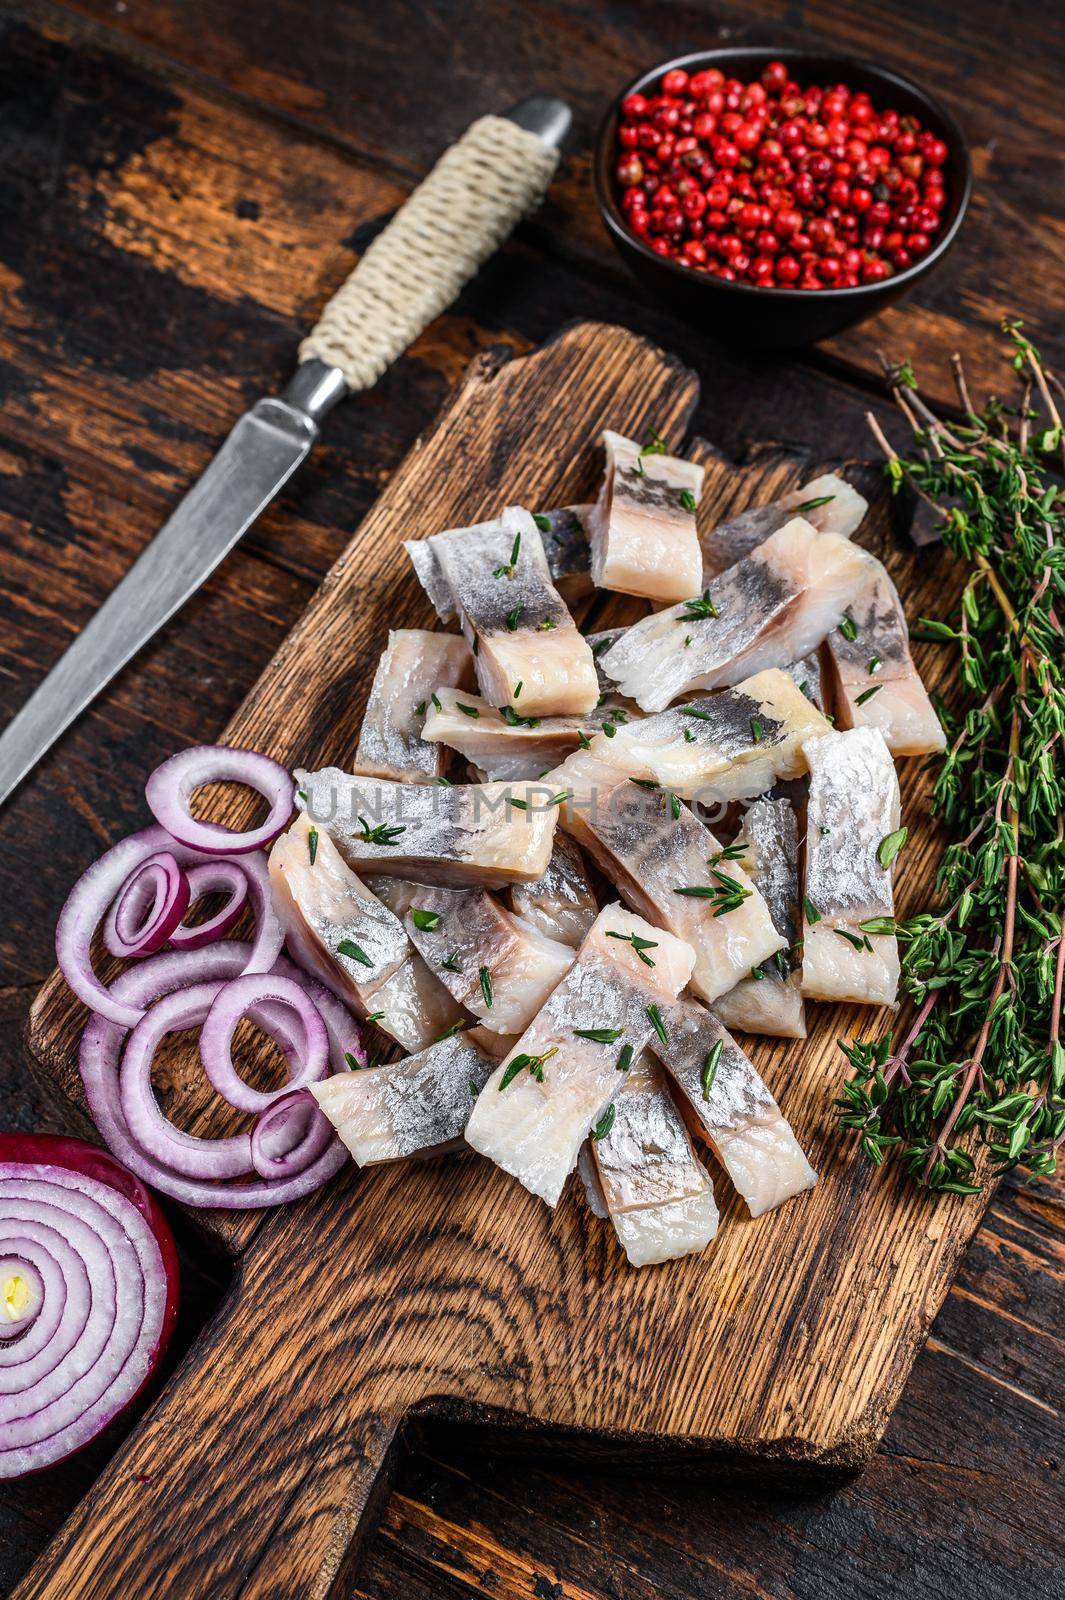 Pickled marinated herring fish sliced fillet. wooden background. Top view. Copy space.